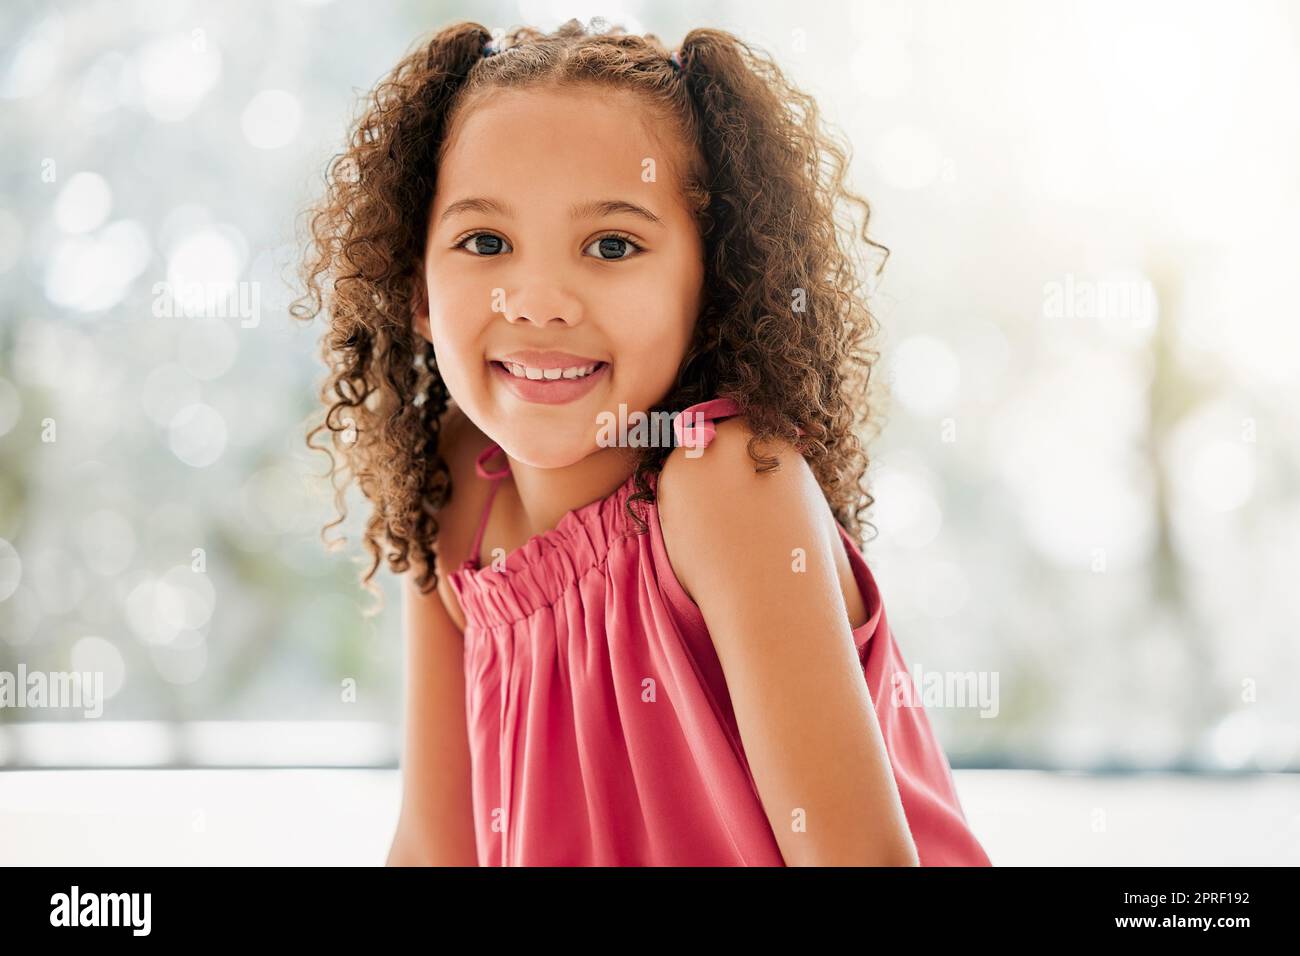 Cute, adorable and sweet young girl with a happy and healthy childhood growing up at home. Portrait of an innocent young female child with a bright smile and relaxing in the house Stock Photo